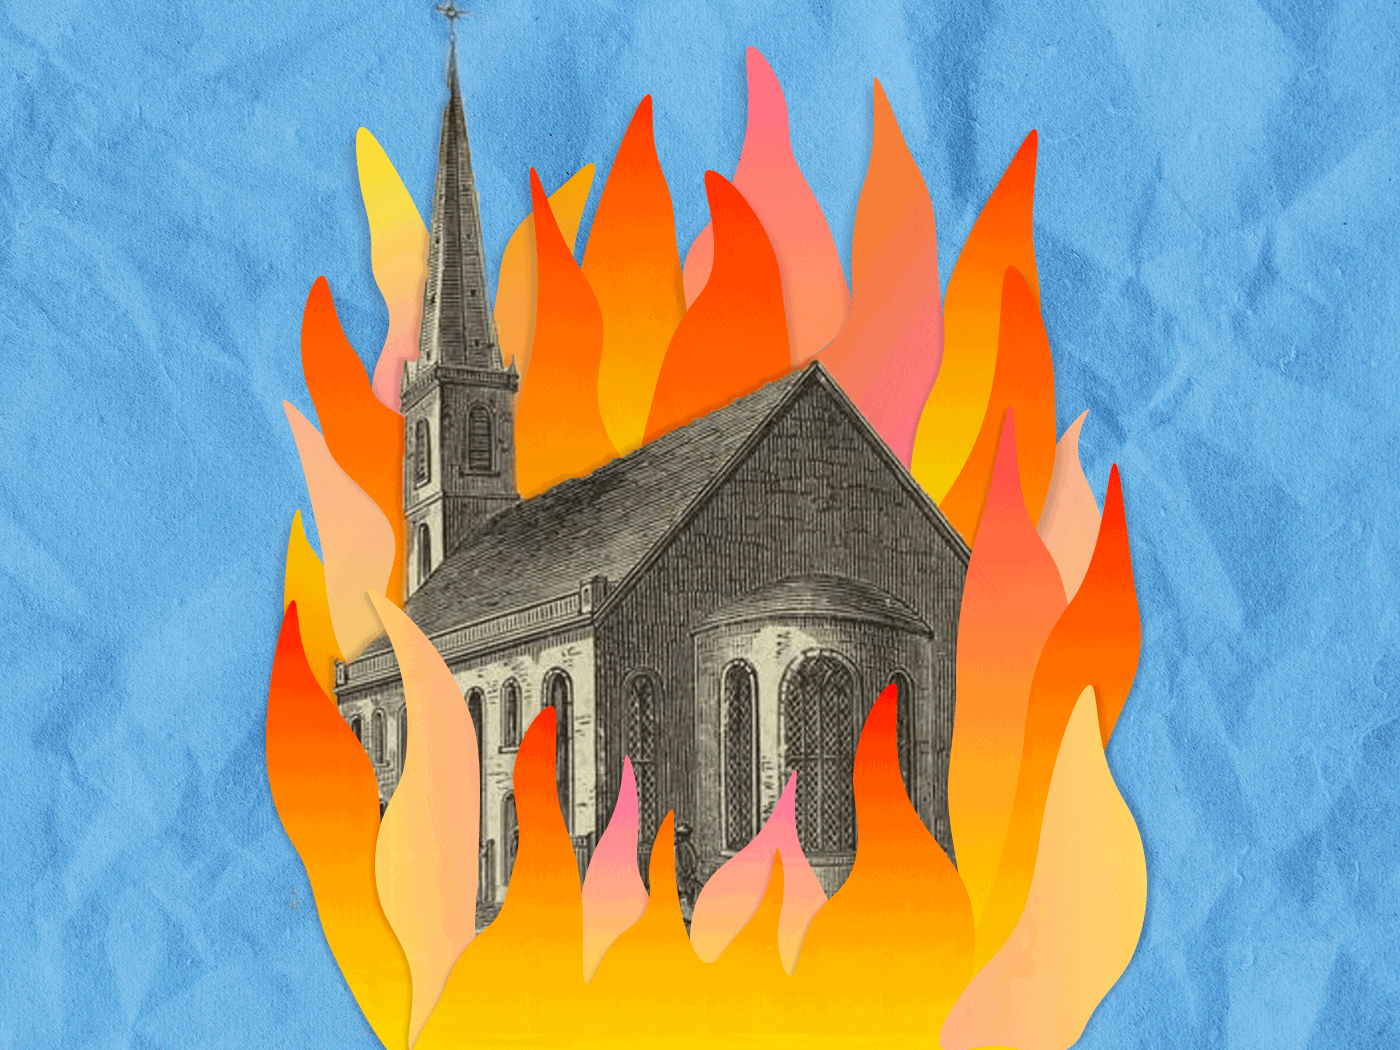 A GIF illustration of Trinity Church in flames